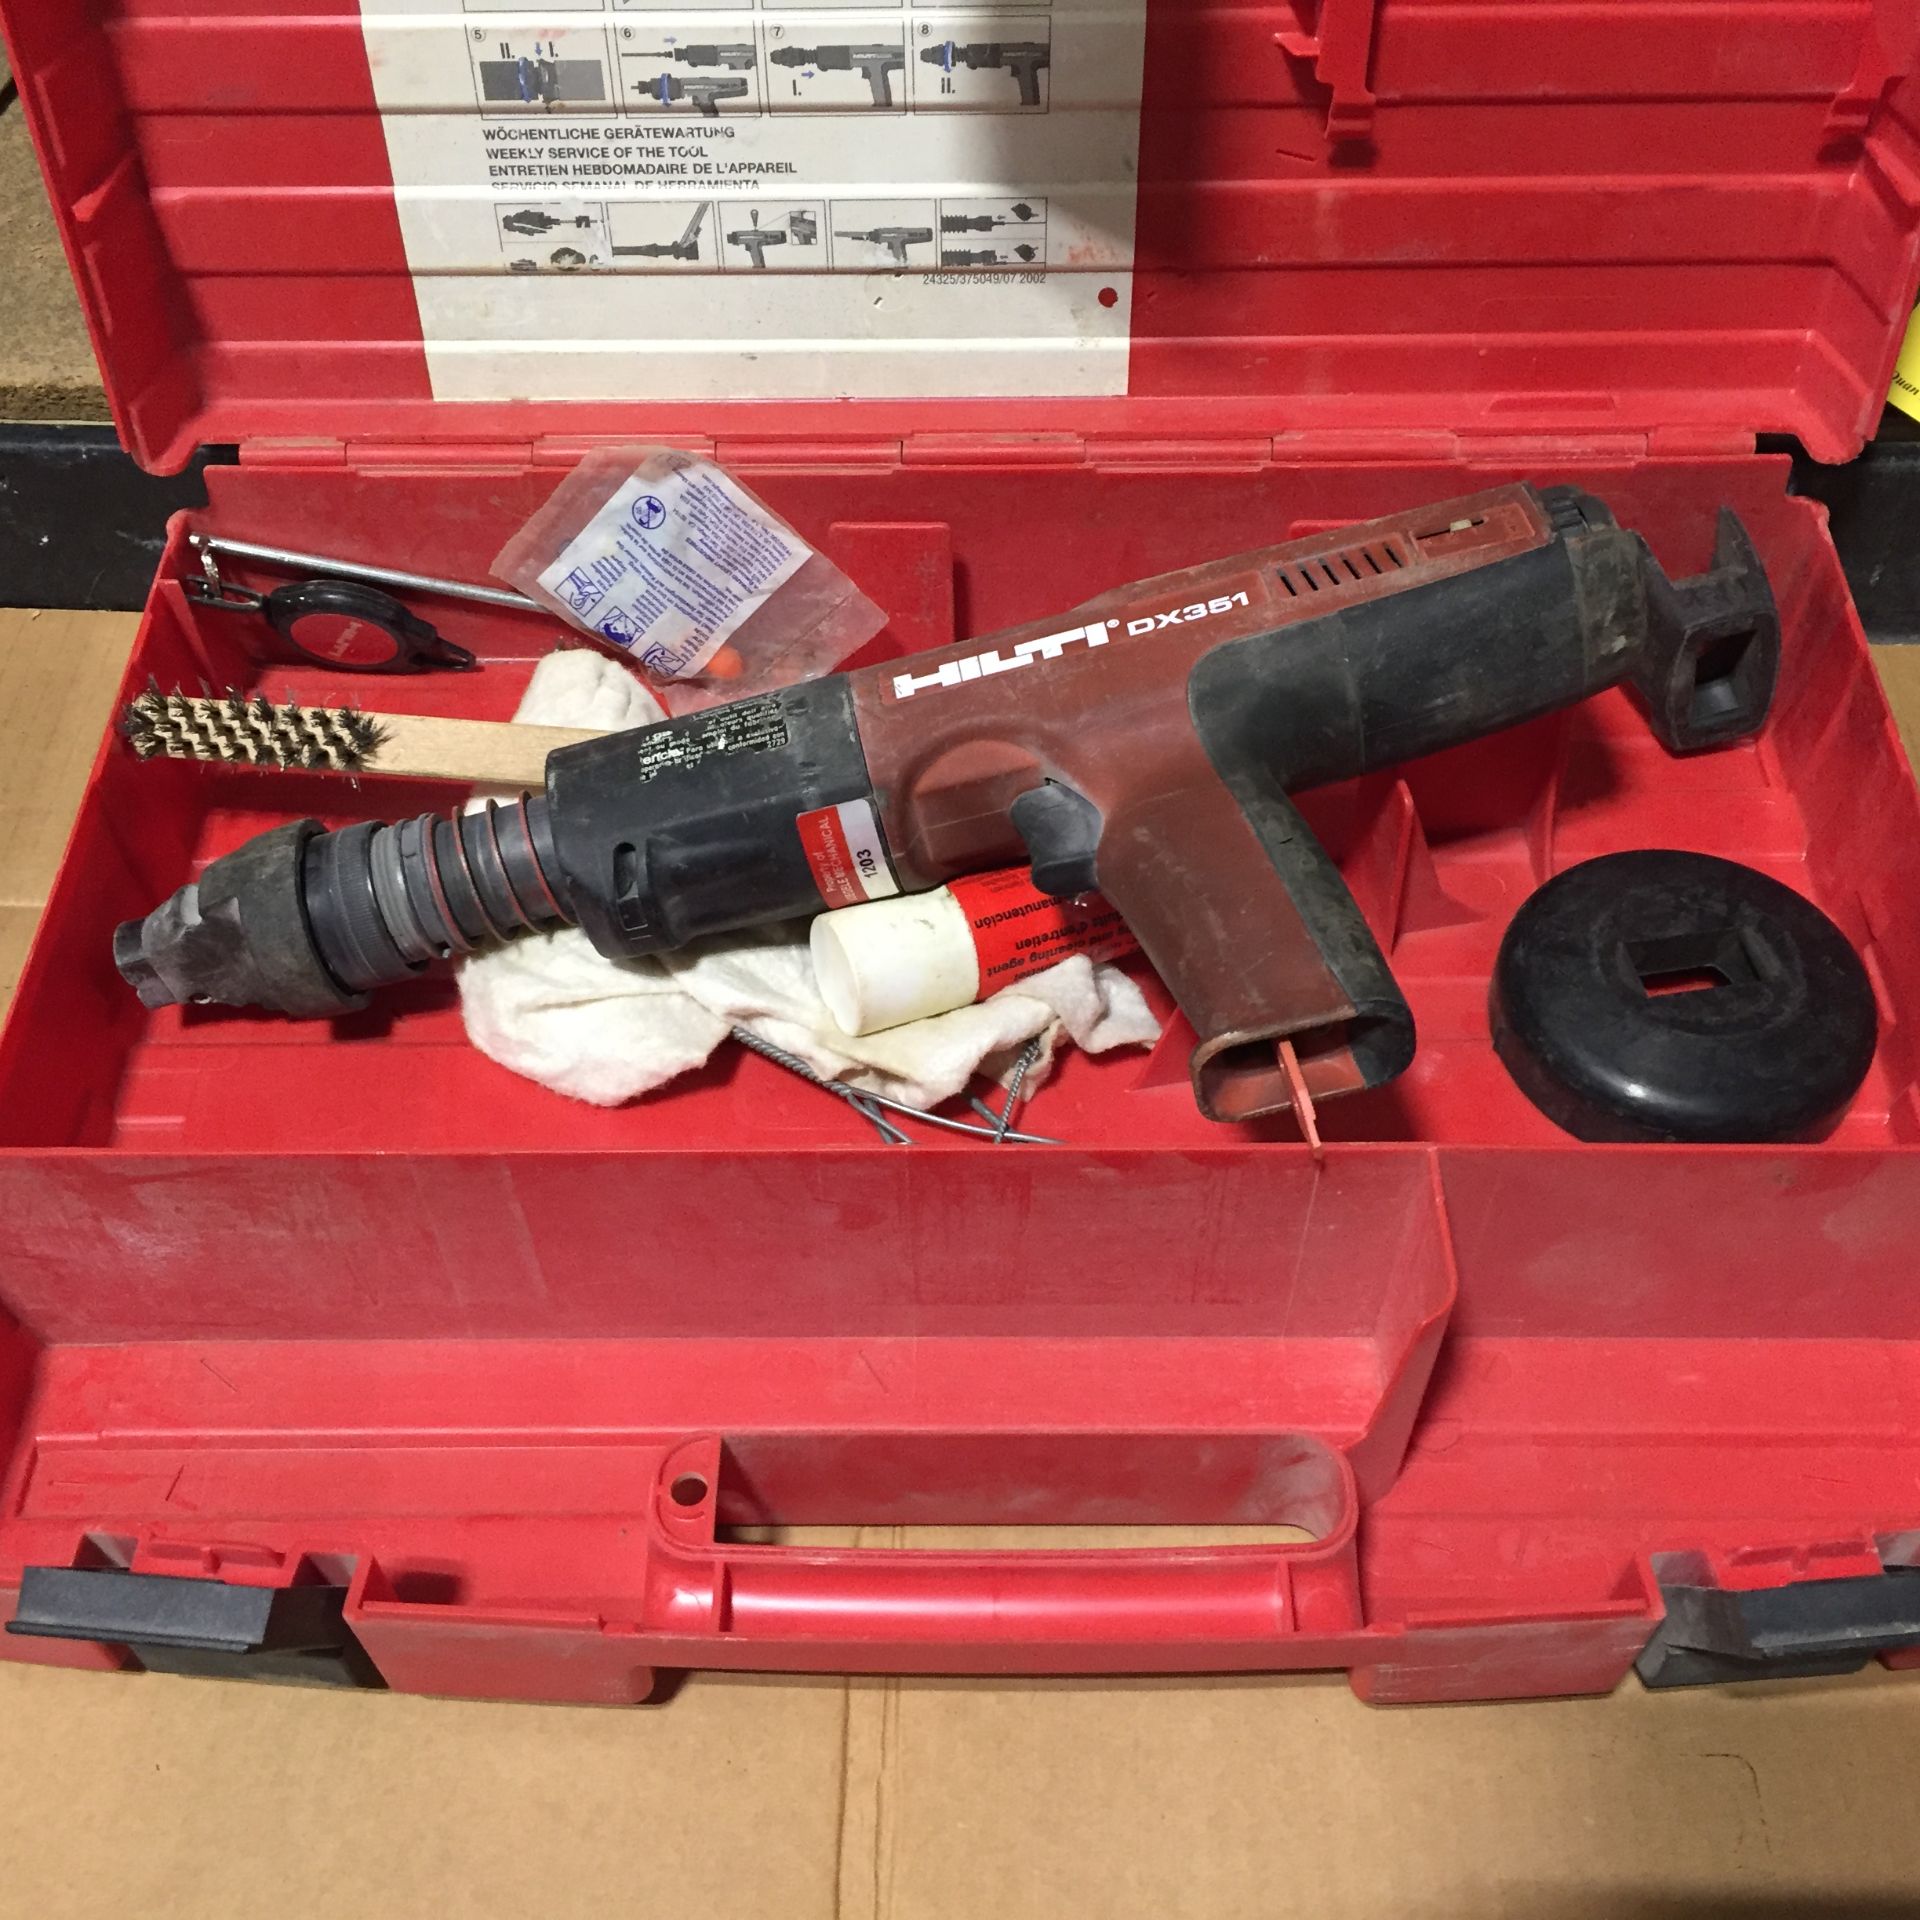 Hilti Powder Actuated Tool, m/n DX351